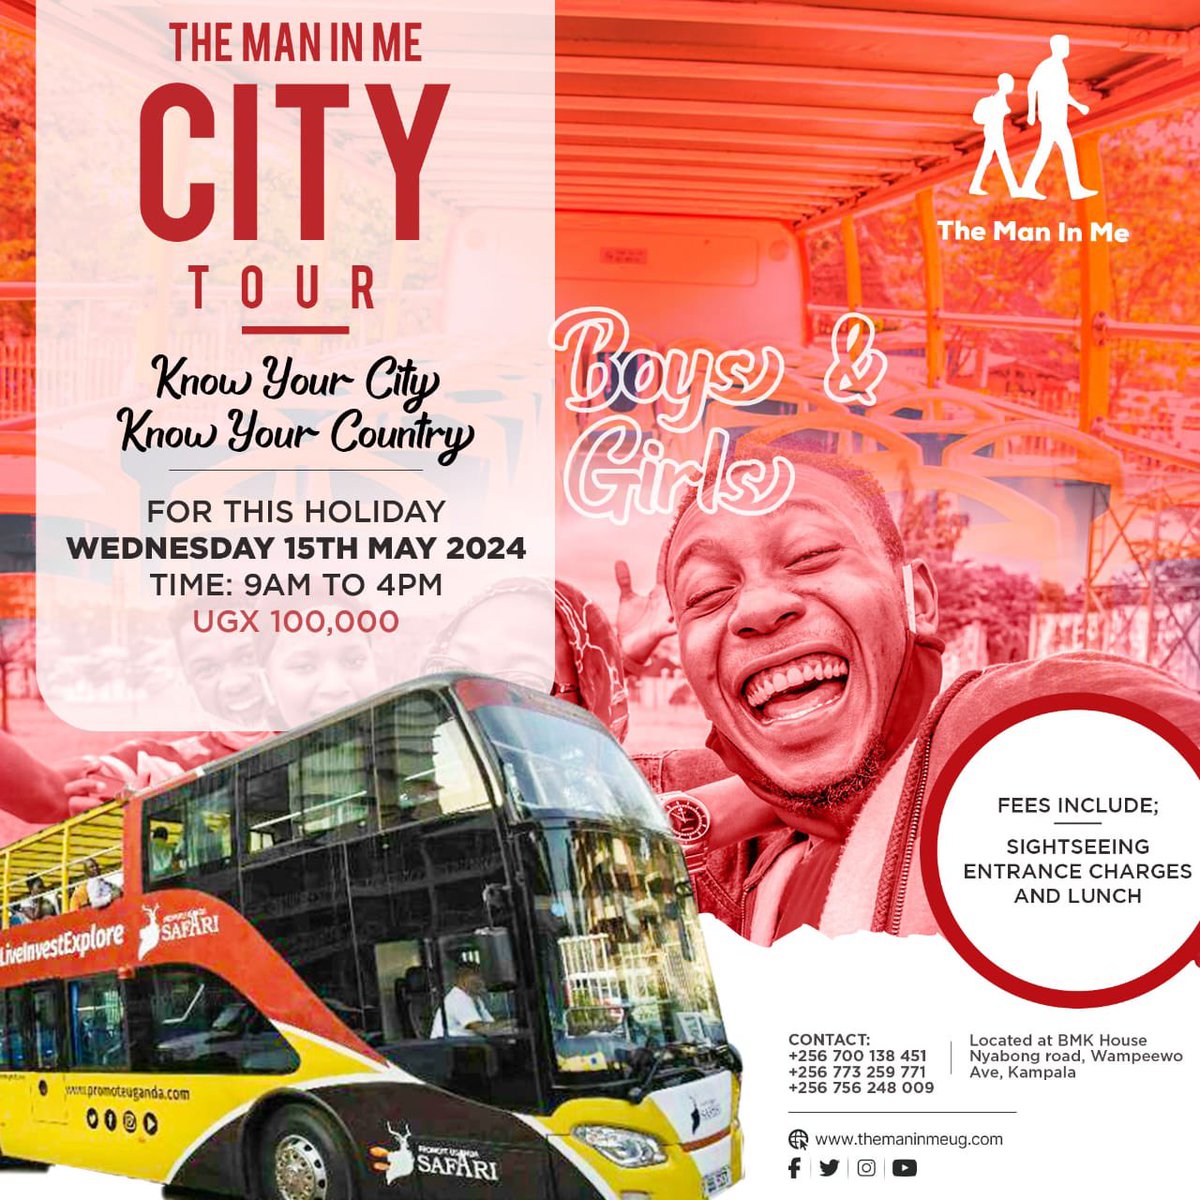 For the holiday makers, it's your time to know your city with The Man In Me  #CityTour. Get to learn as you have fun.

#TheManInMe